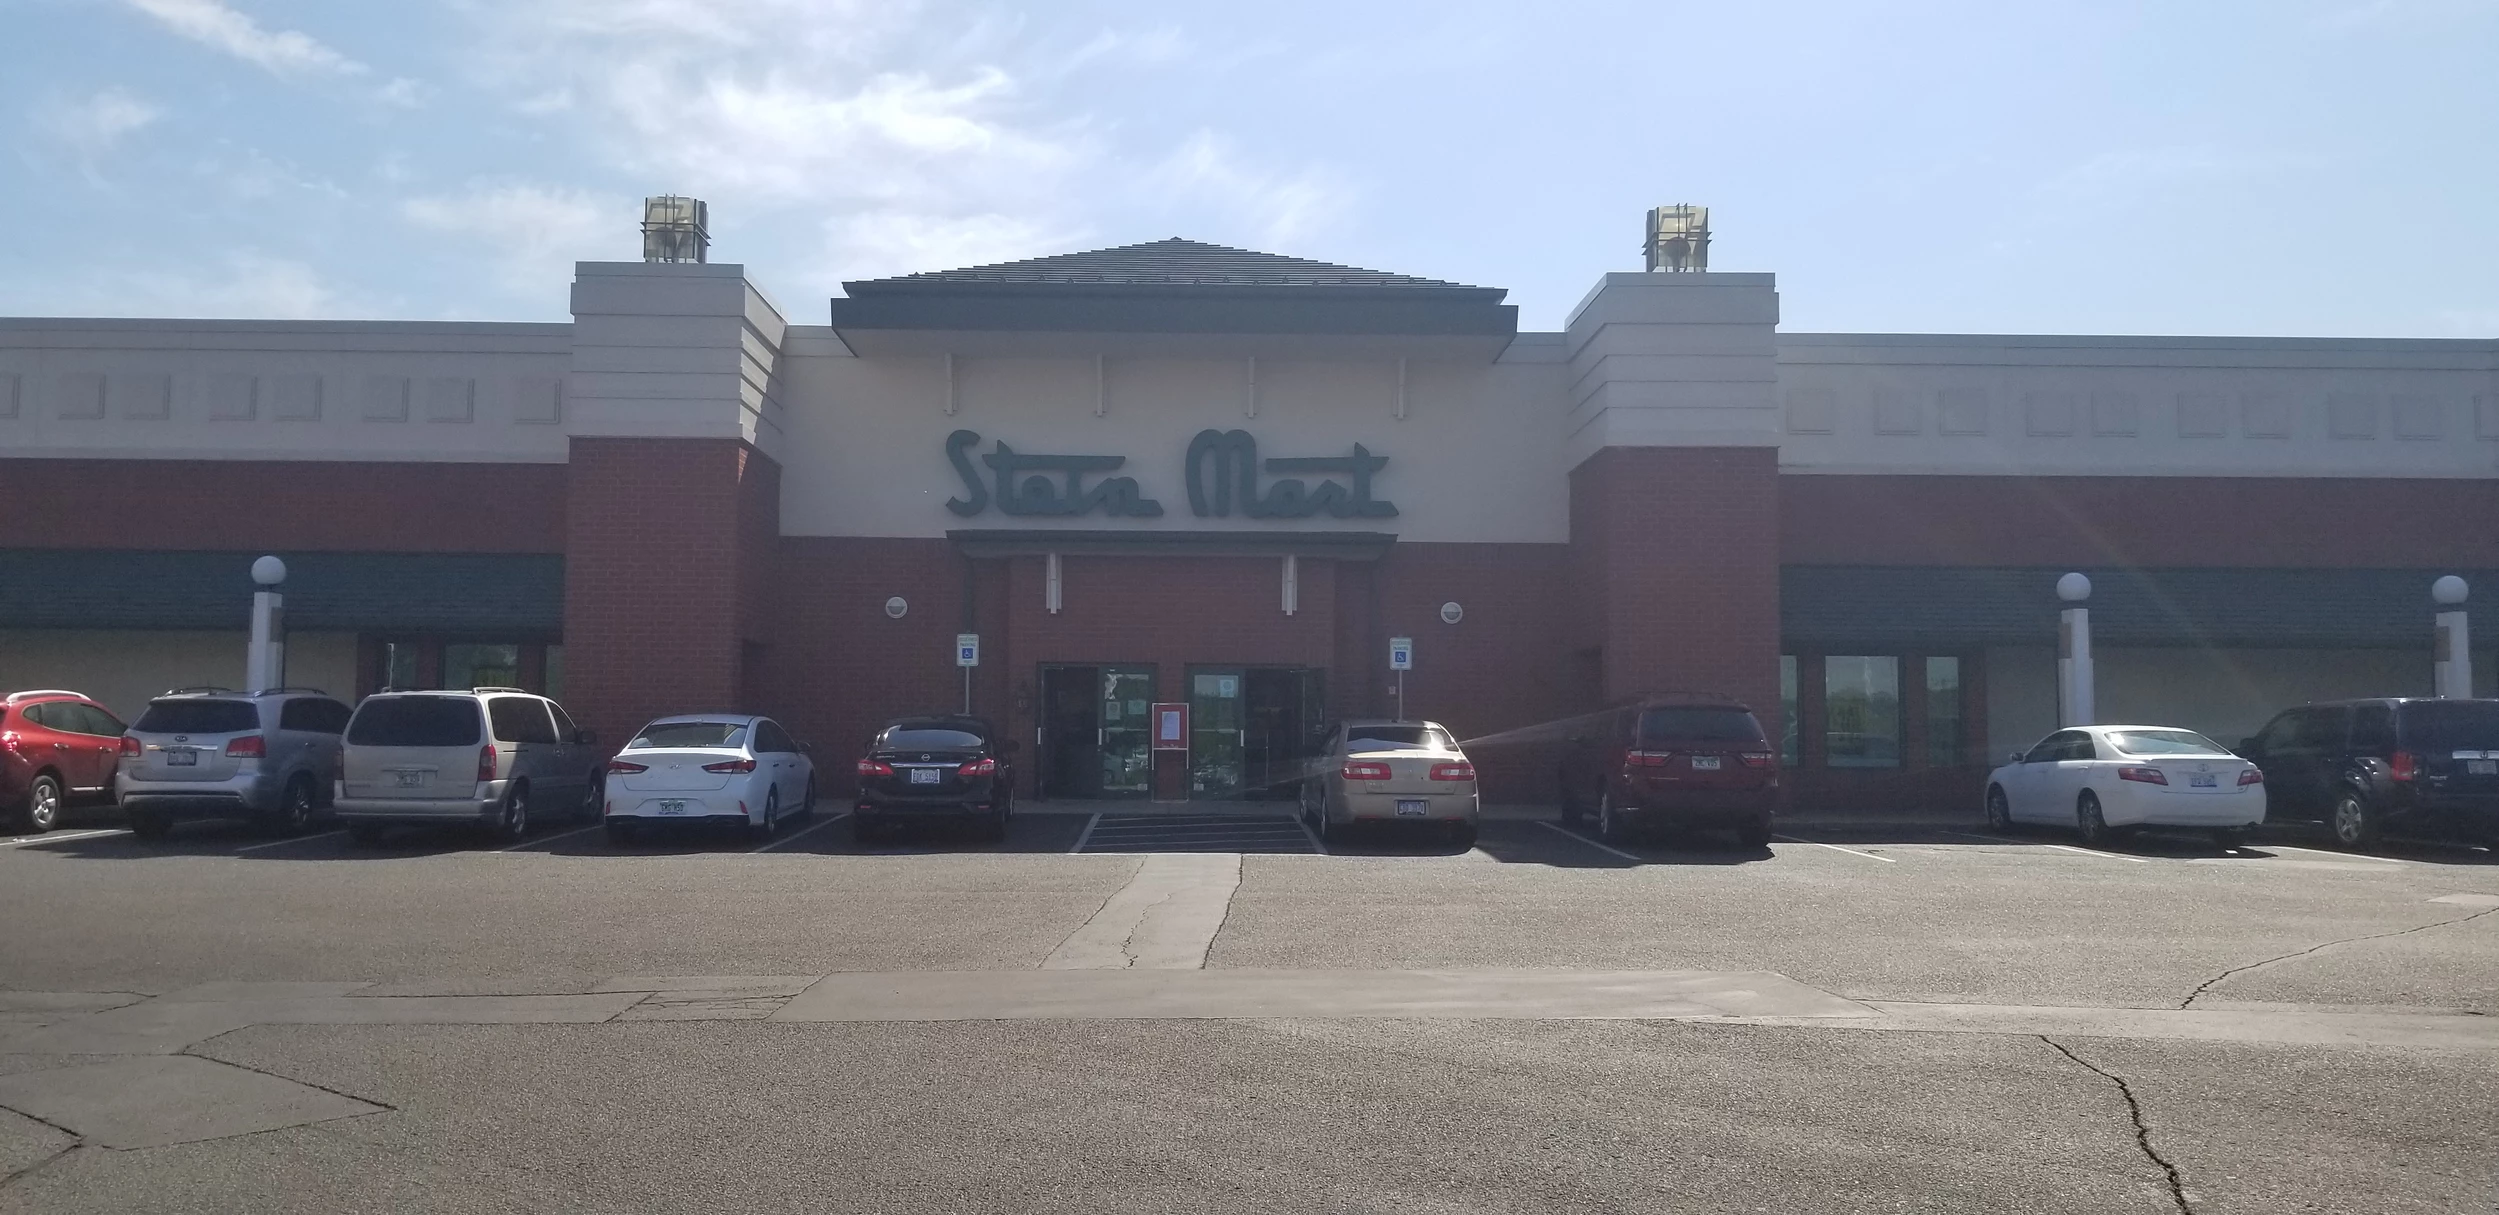 Stein Mart Opens Two New Michigan Stores - Blog - Locations Commercial Real  Estate Services